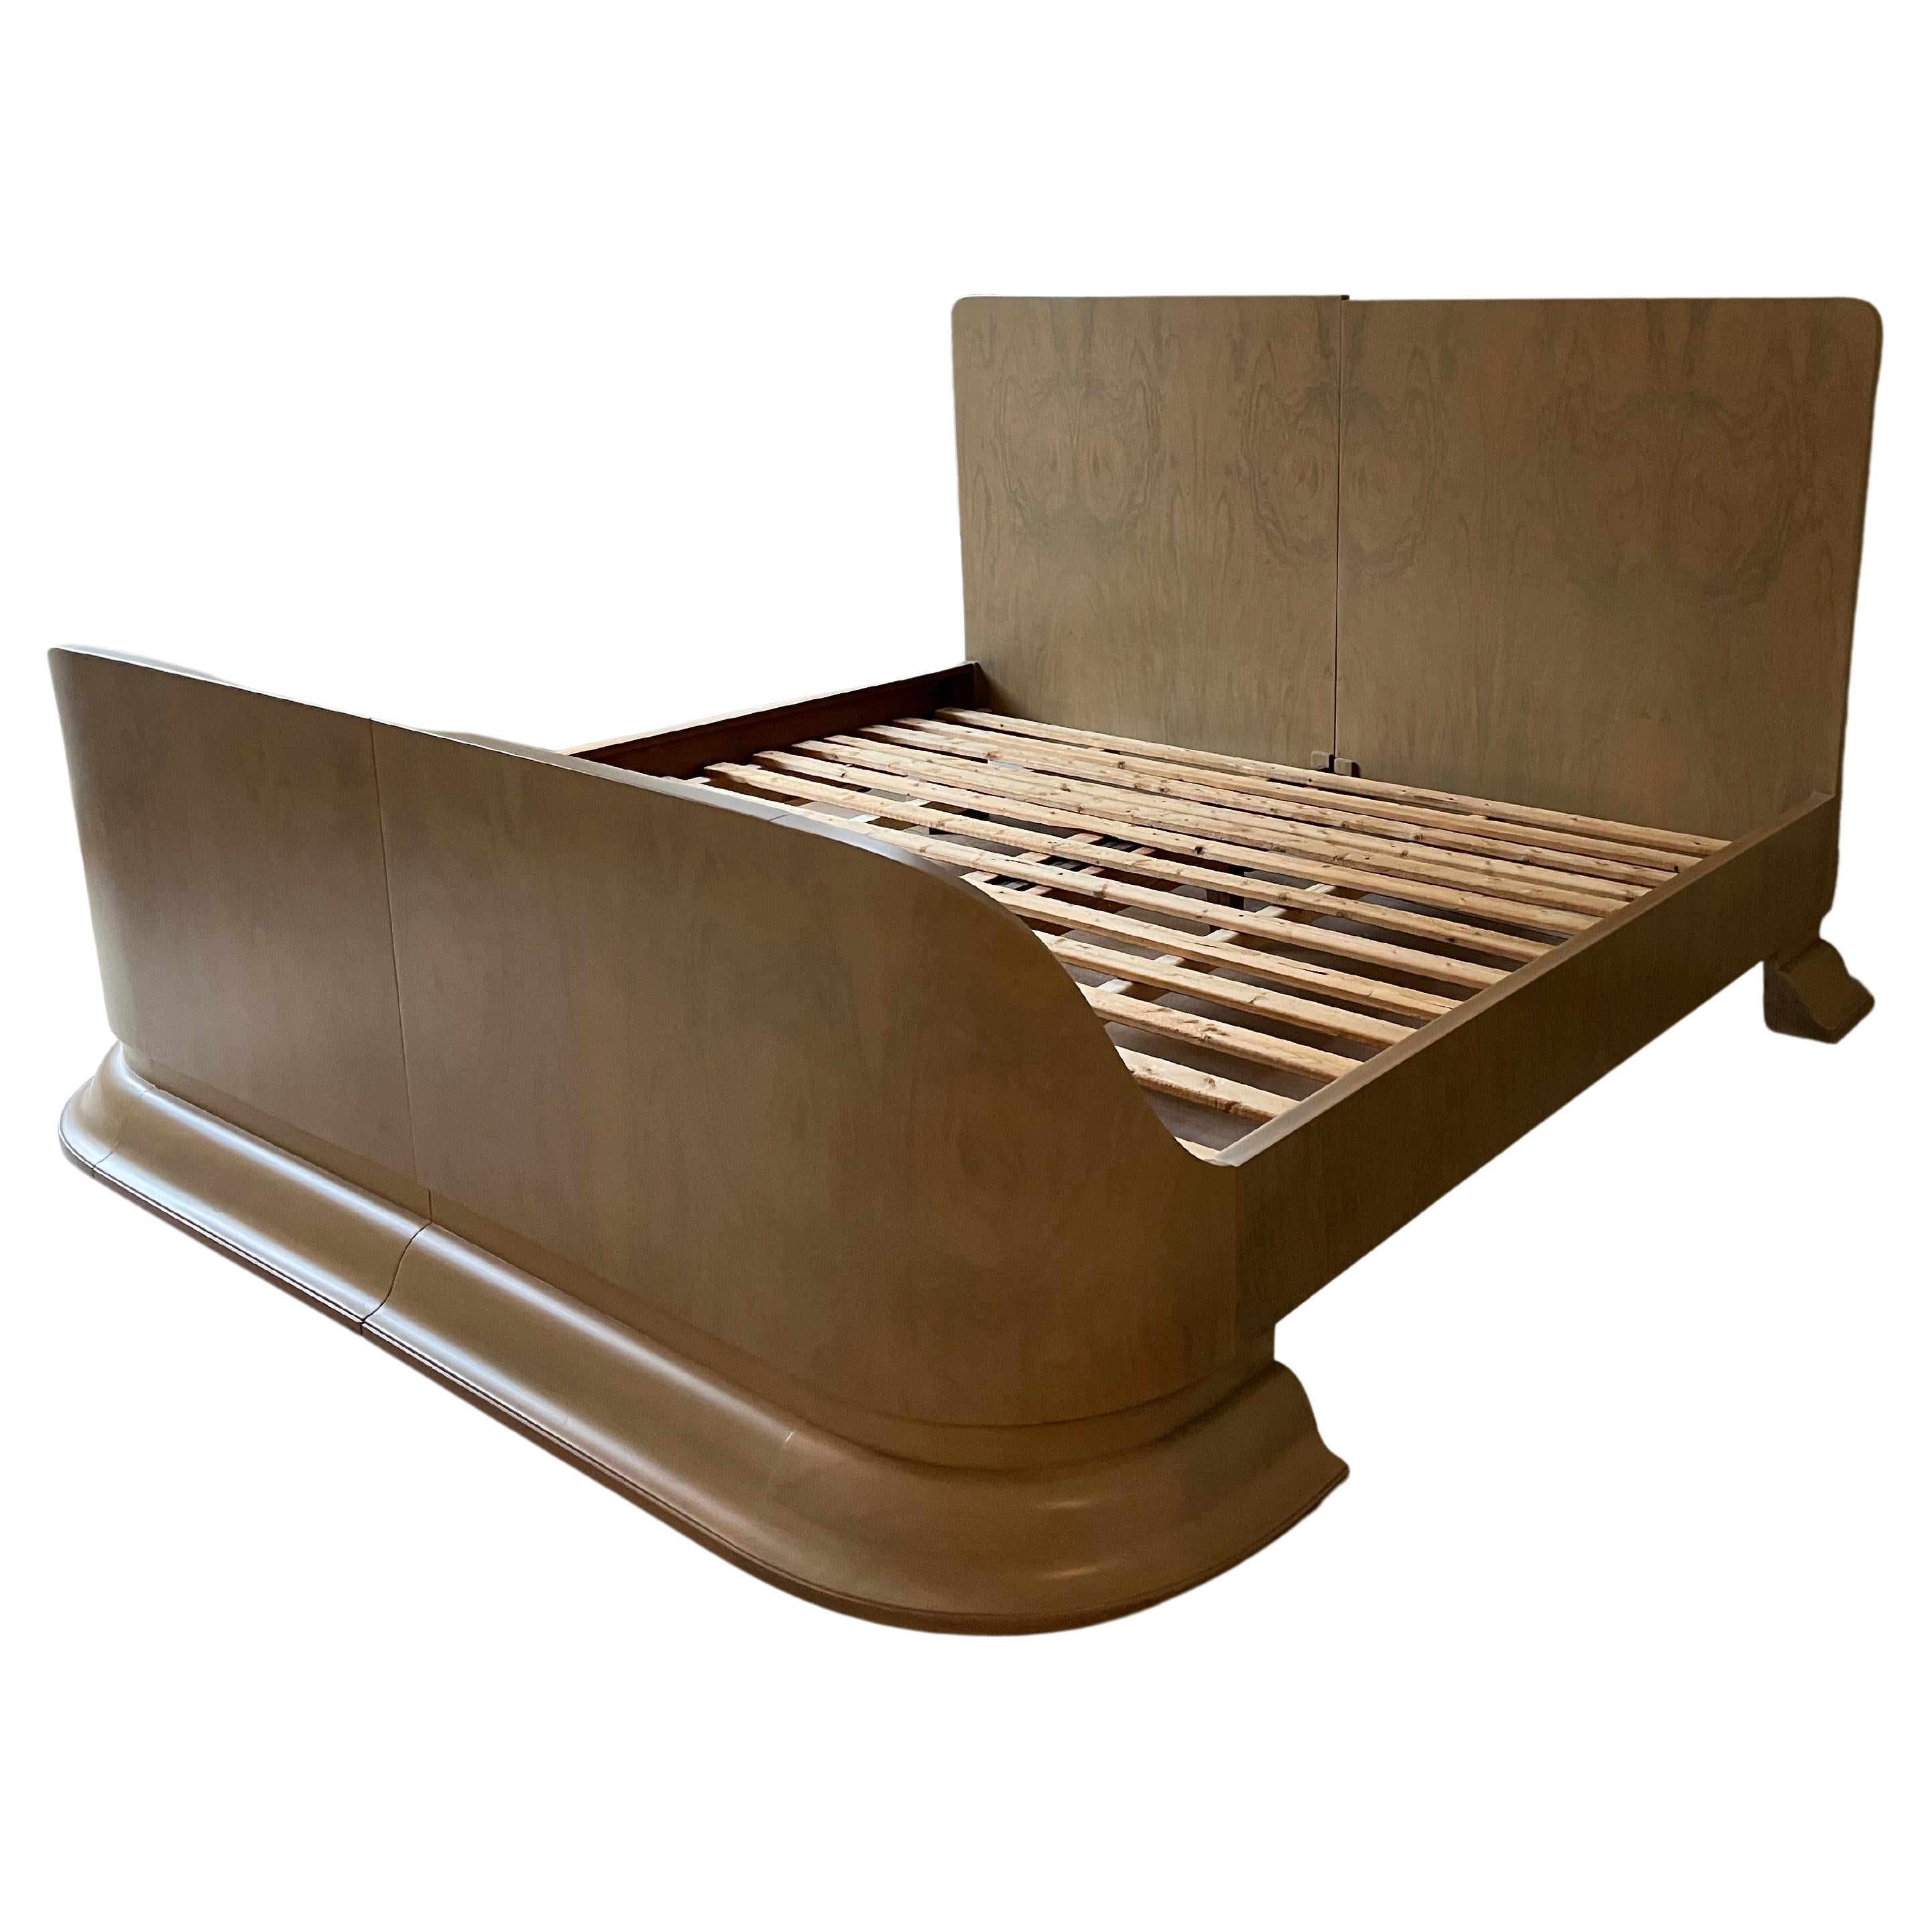 King Size Art Deco Wood Bed